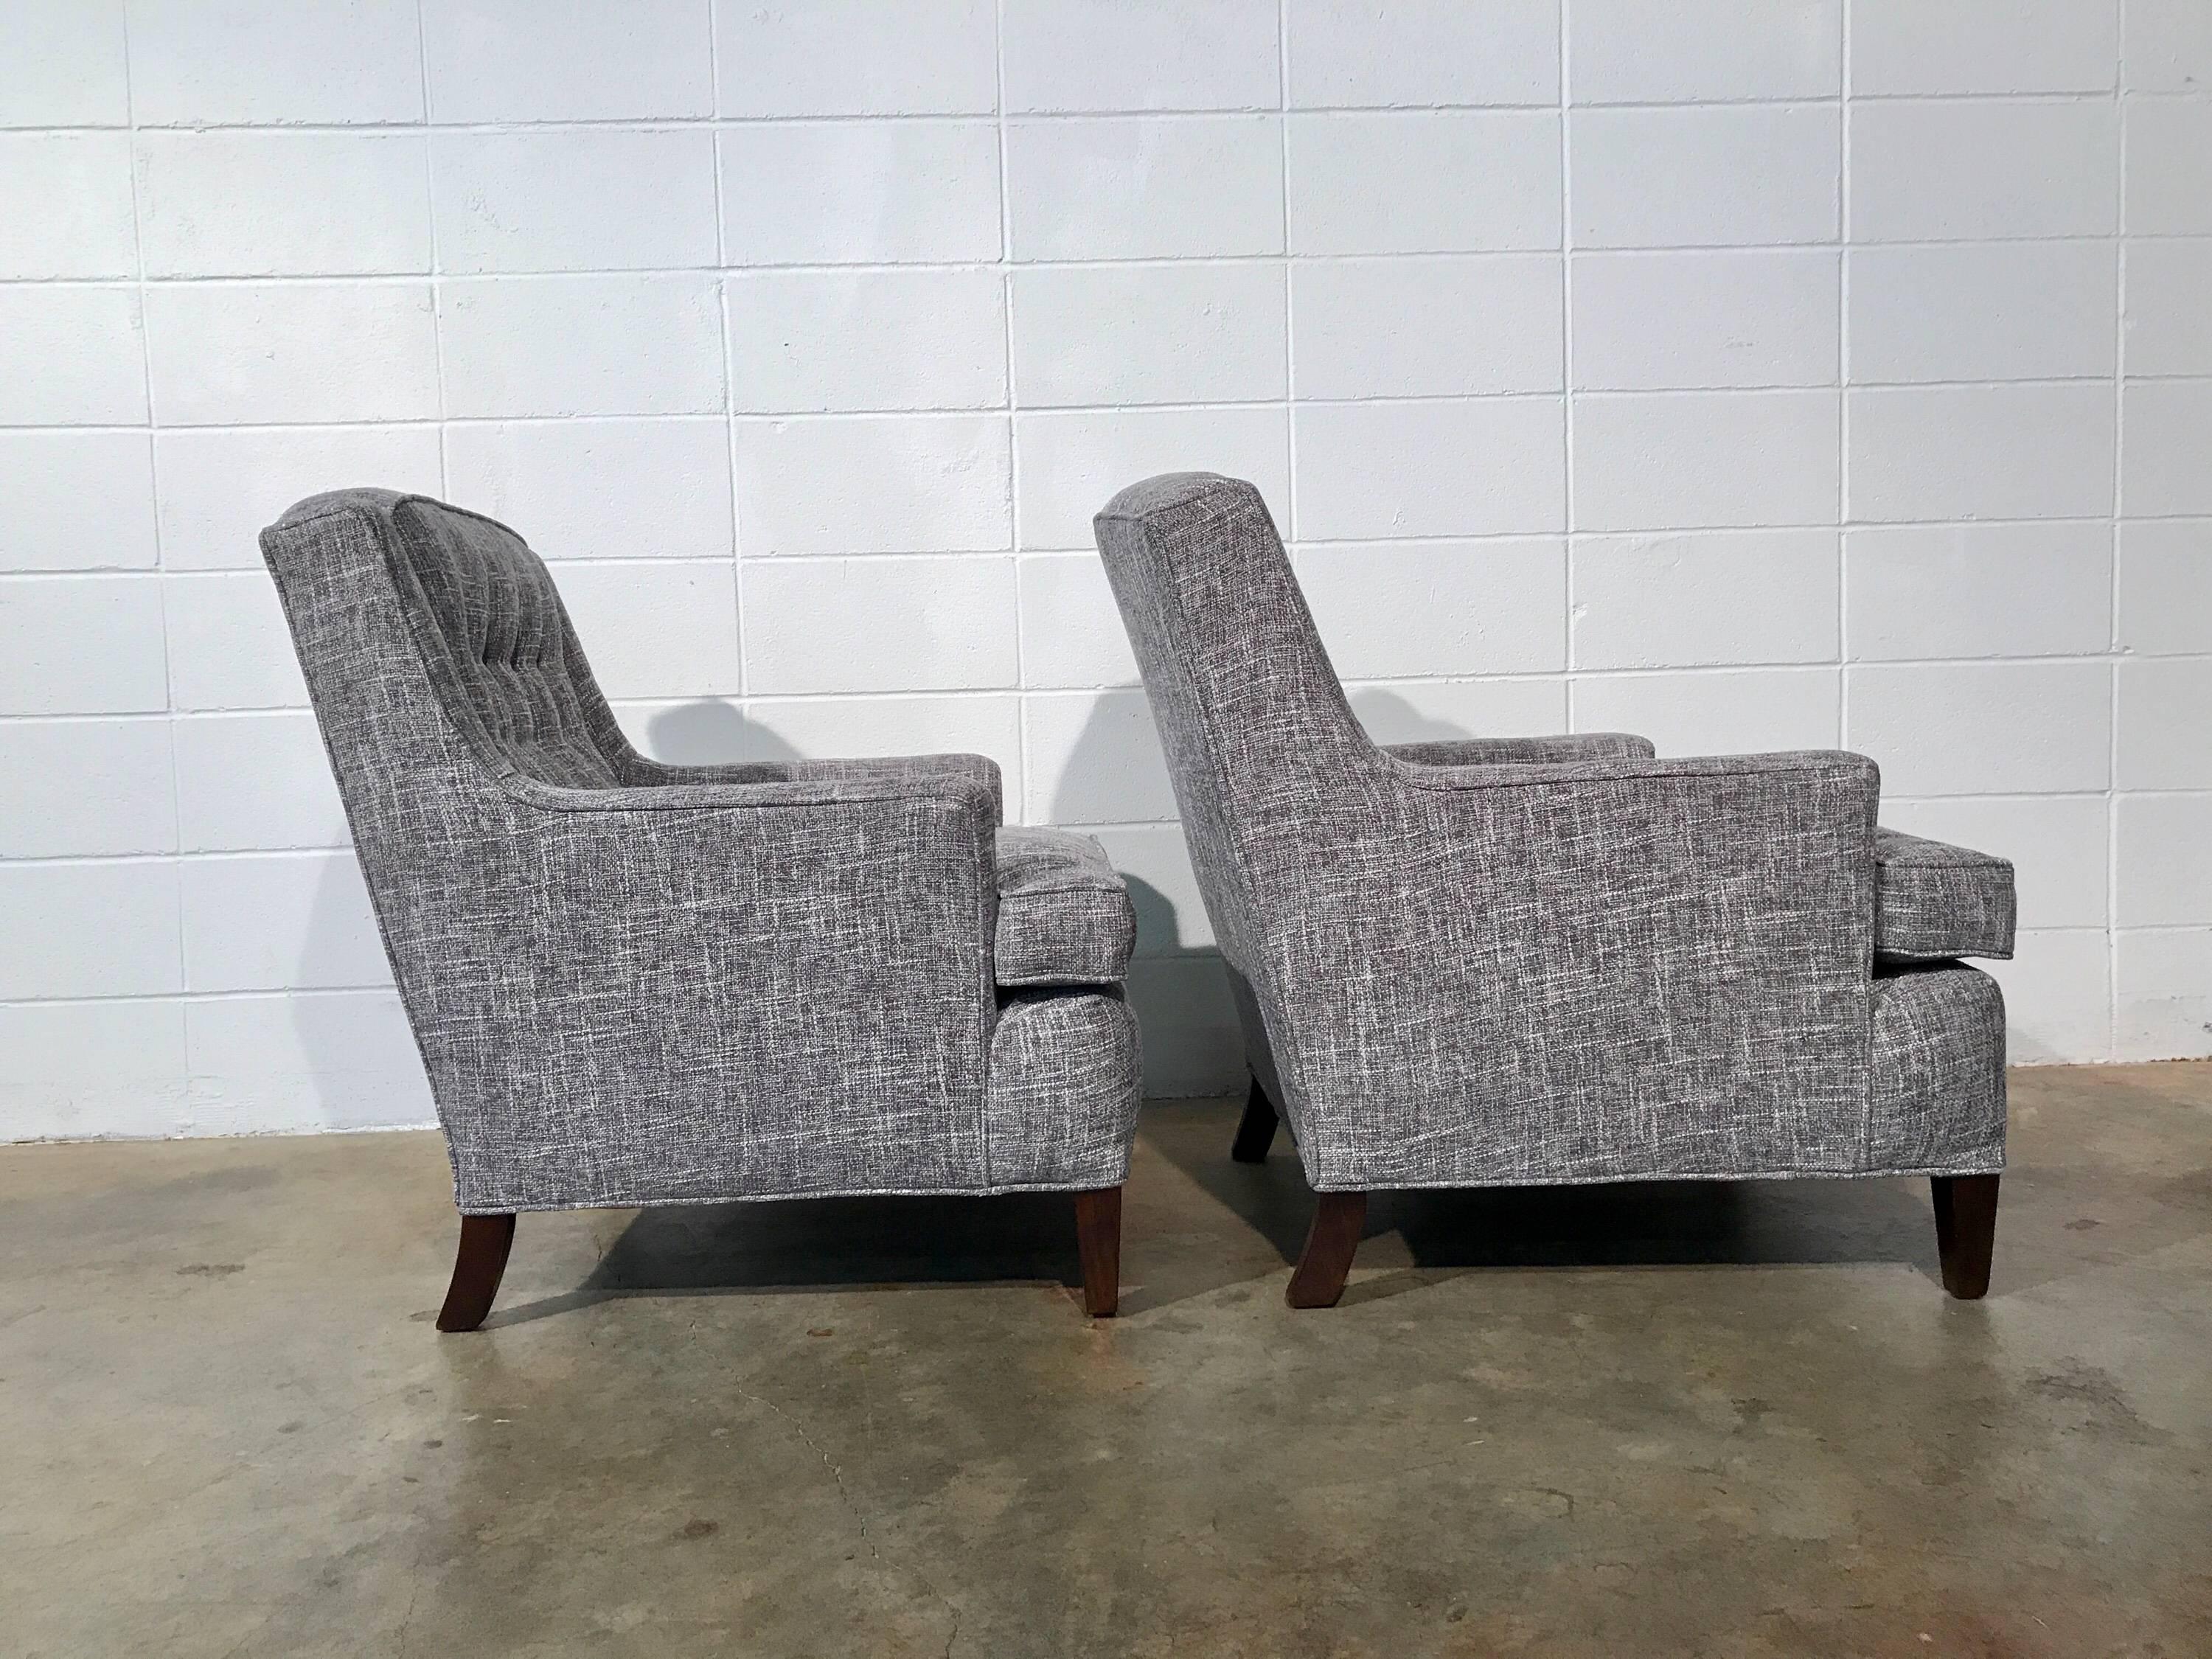 Pair of Restored Mid-Century Modern Lounge Chairs, Gray Upholstery 1